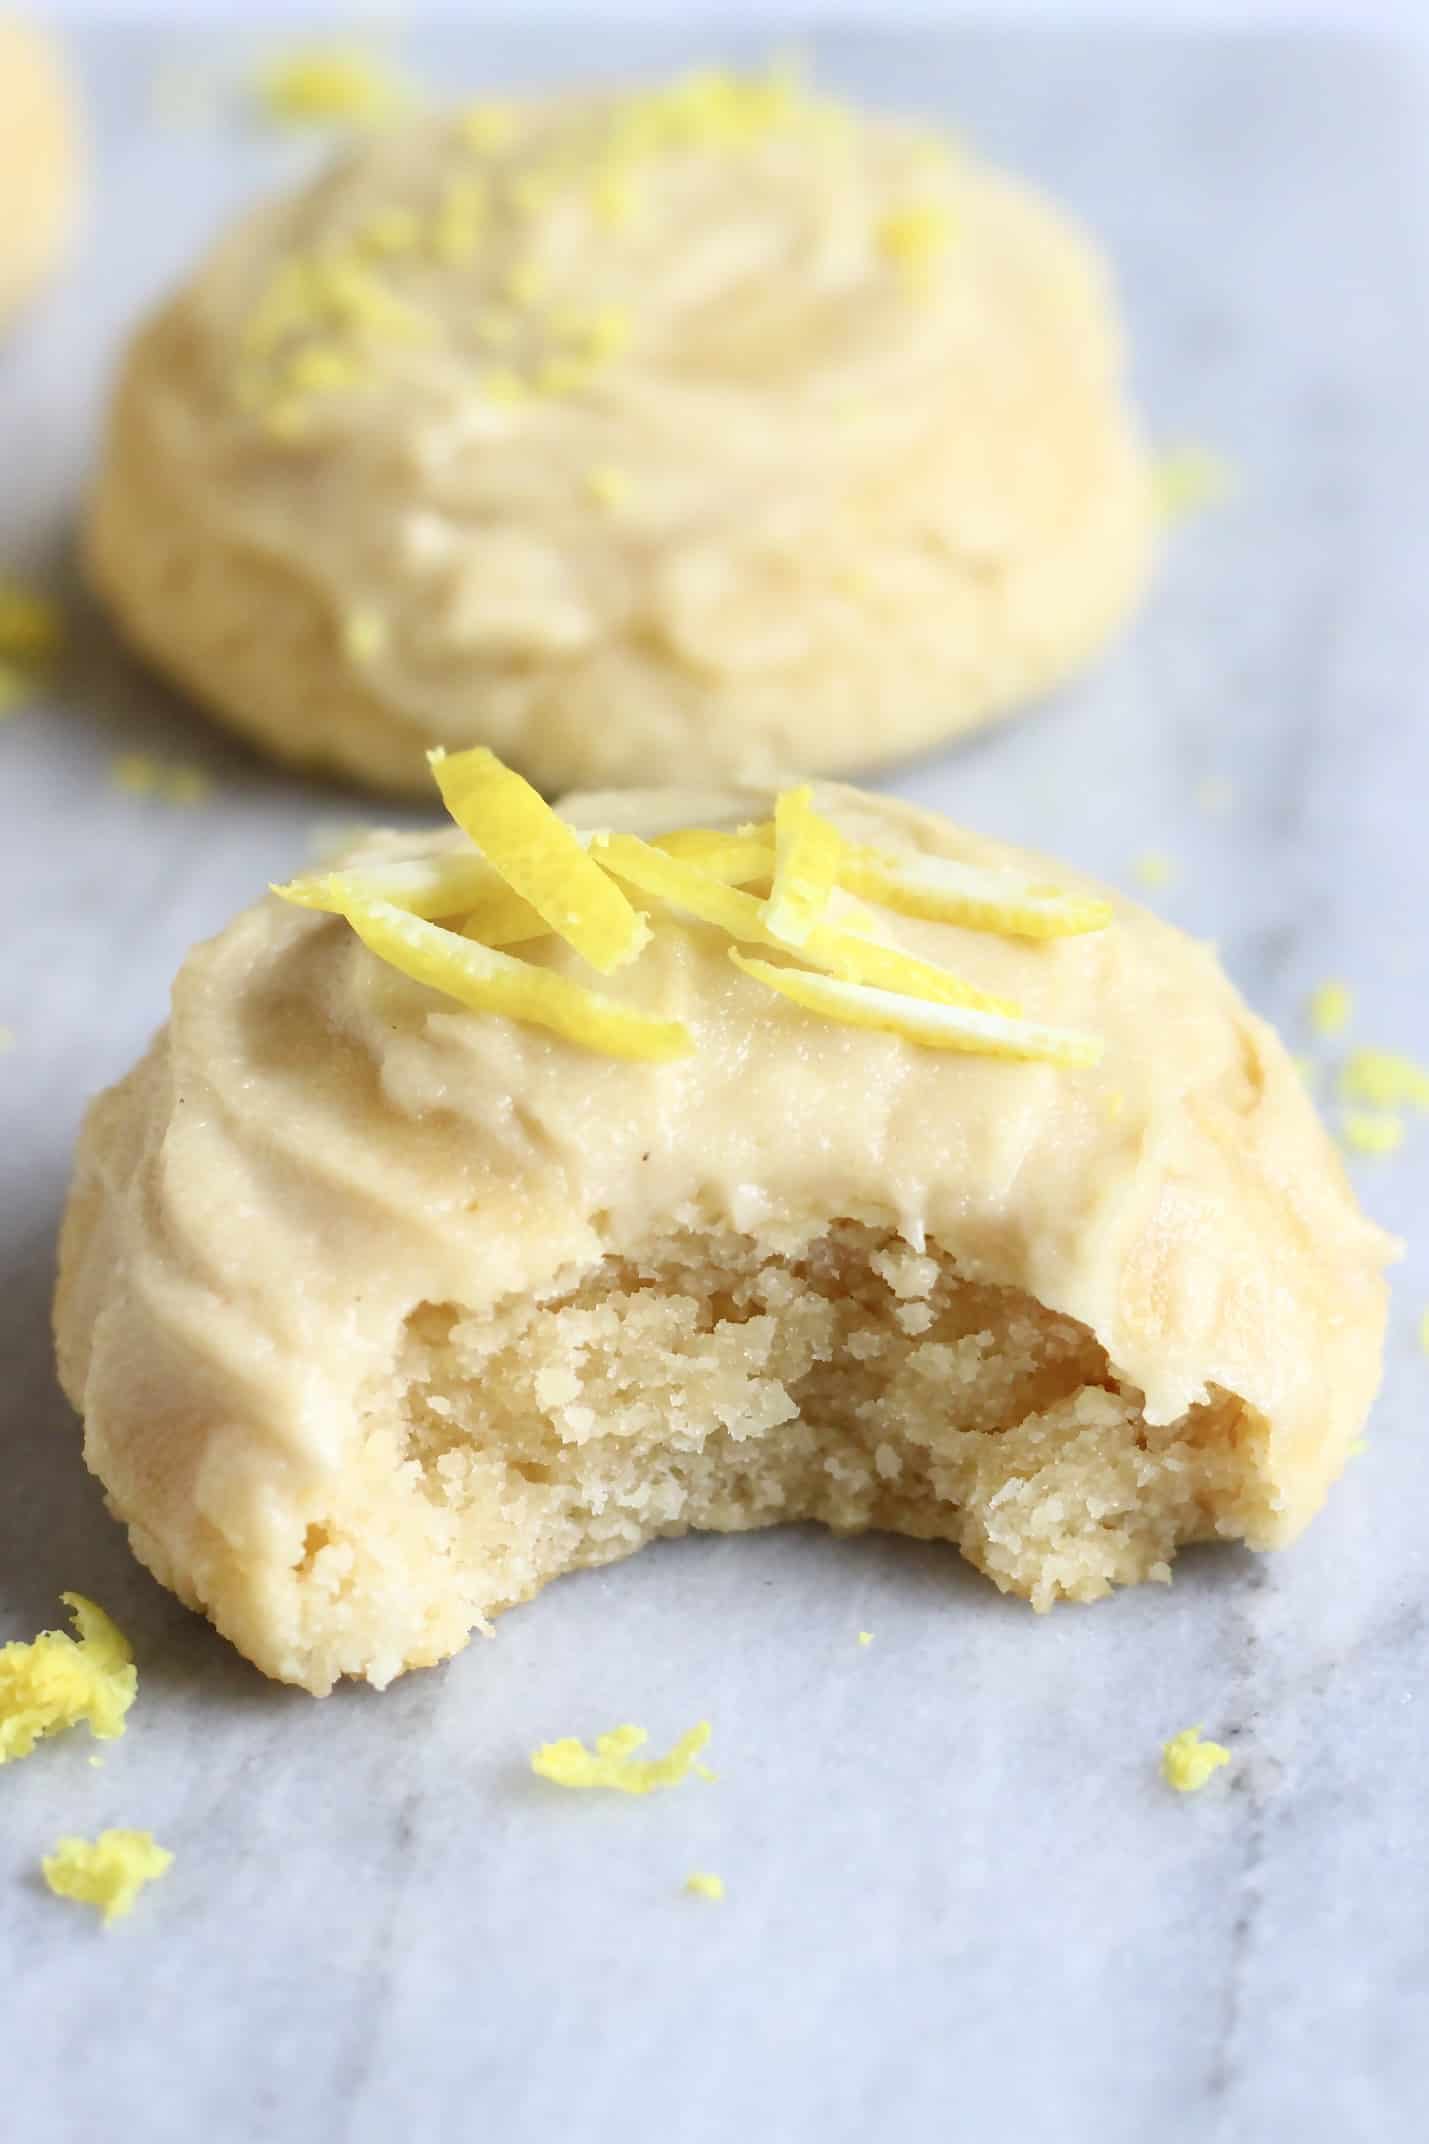 Two gluten-free vegan lemon cookies topped with frosting with a bite taken out of one